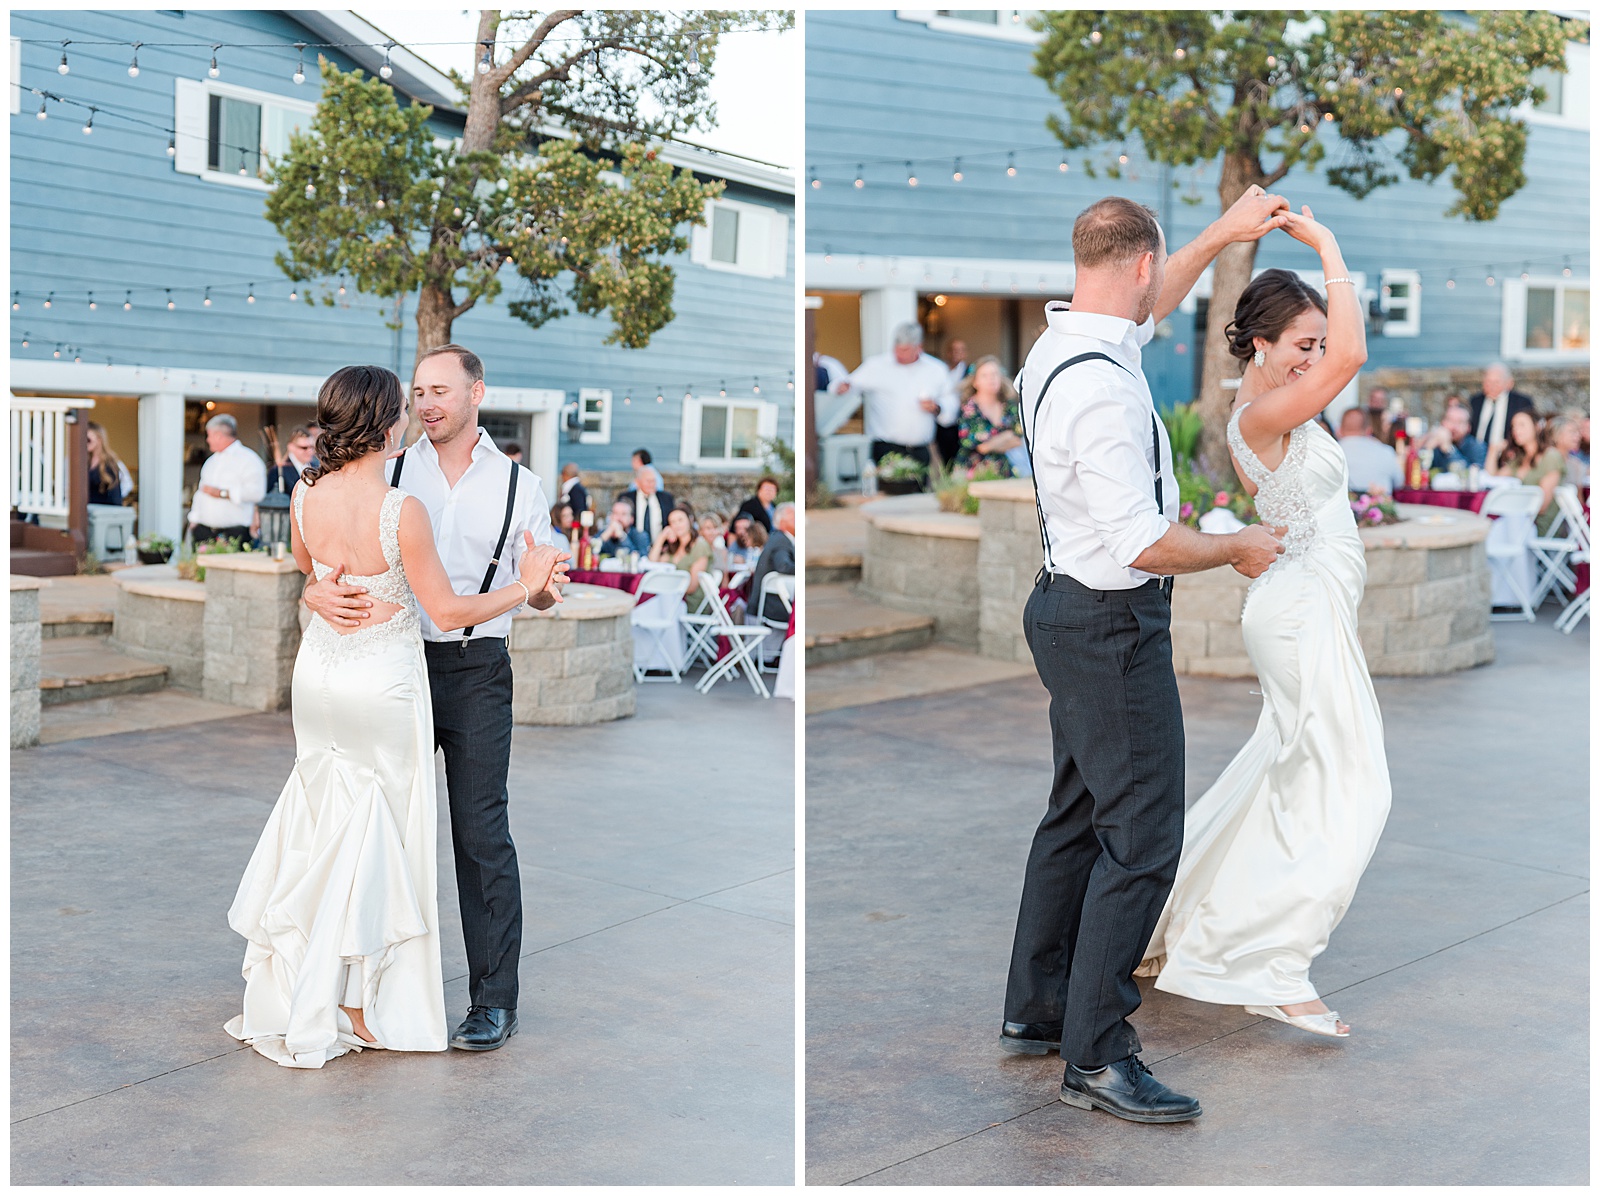 bride and groom having their first dance at their wedding